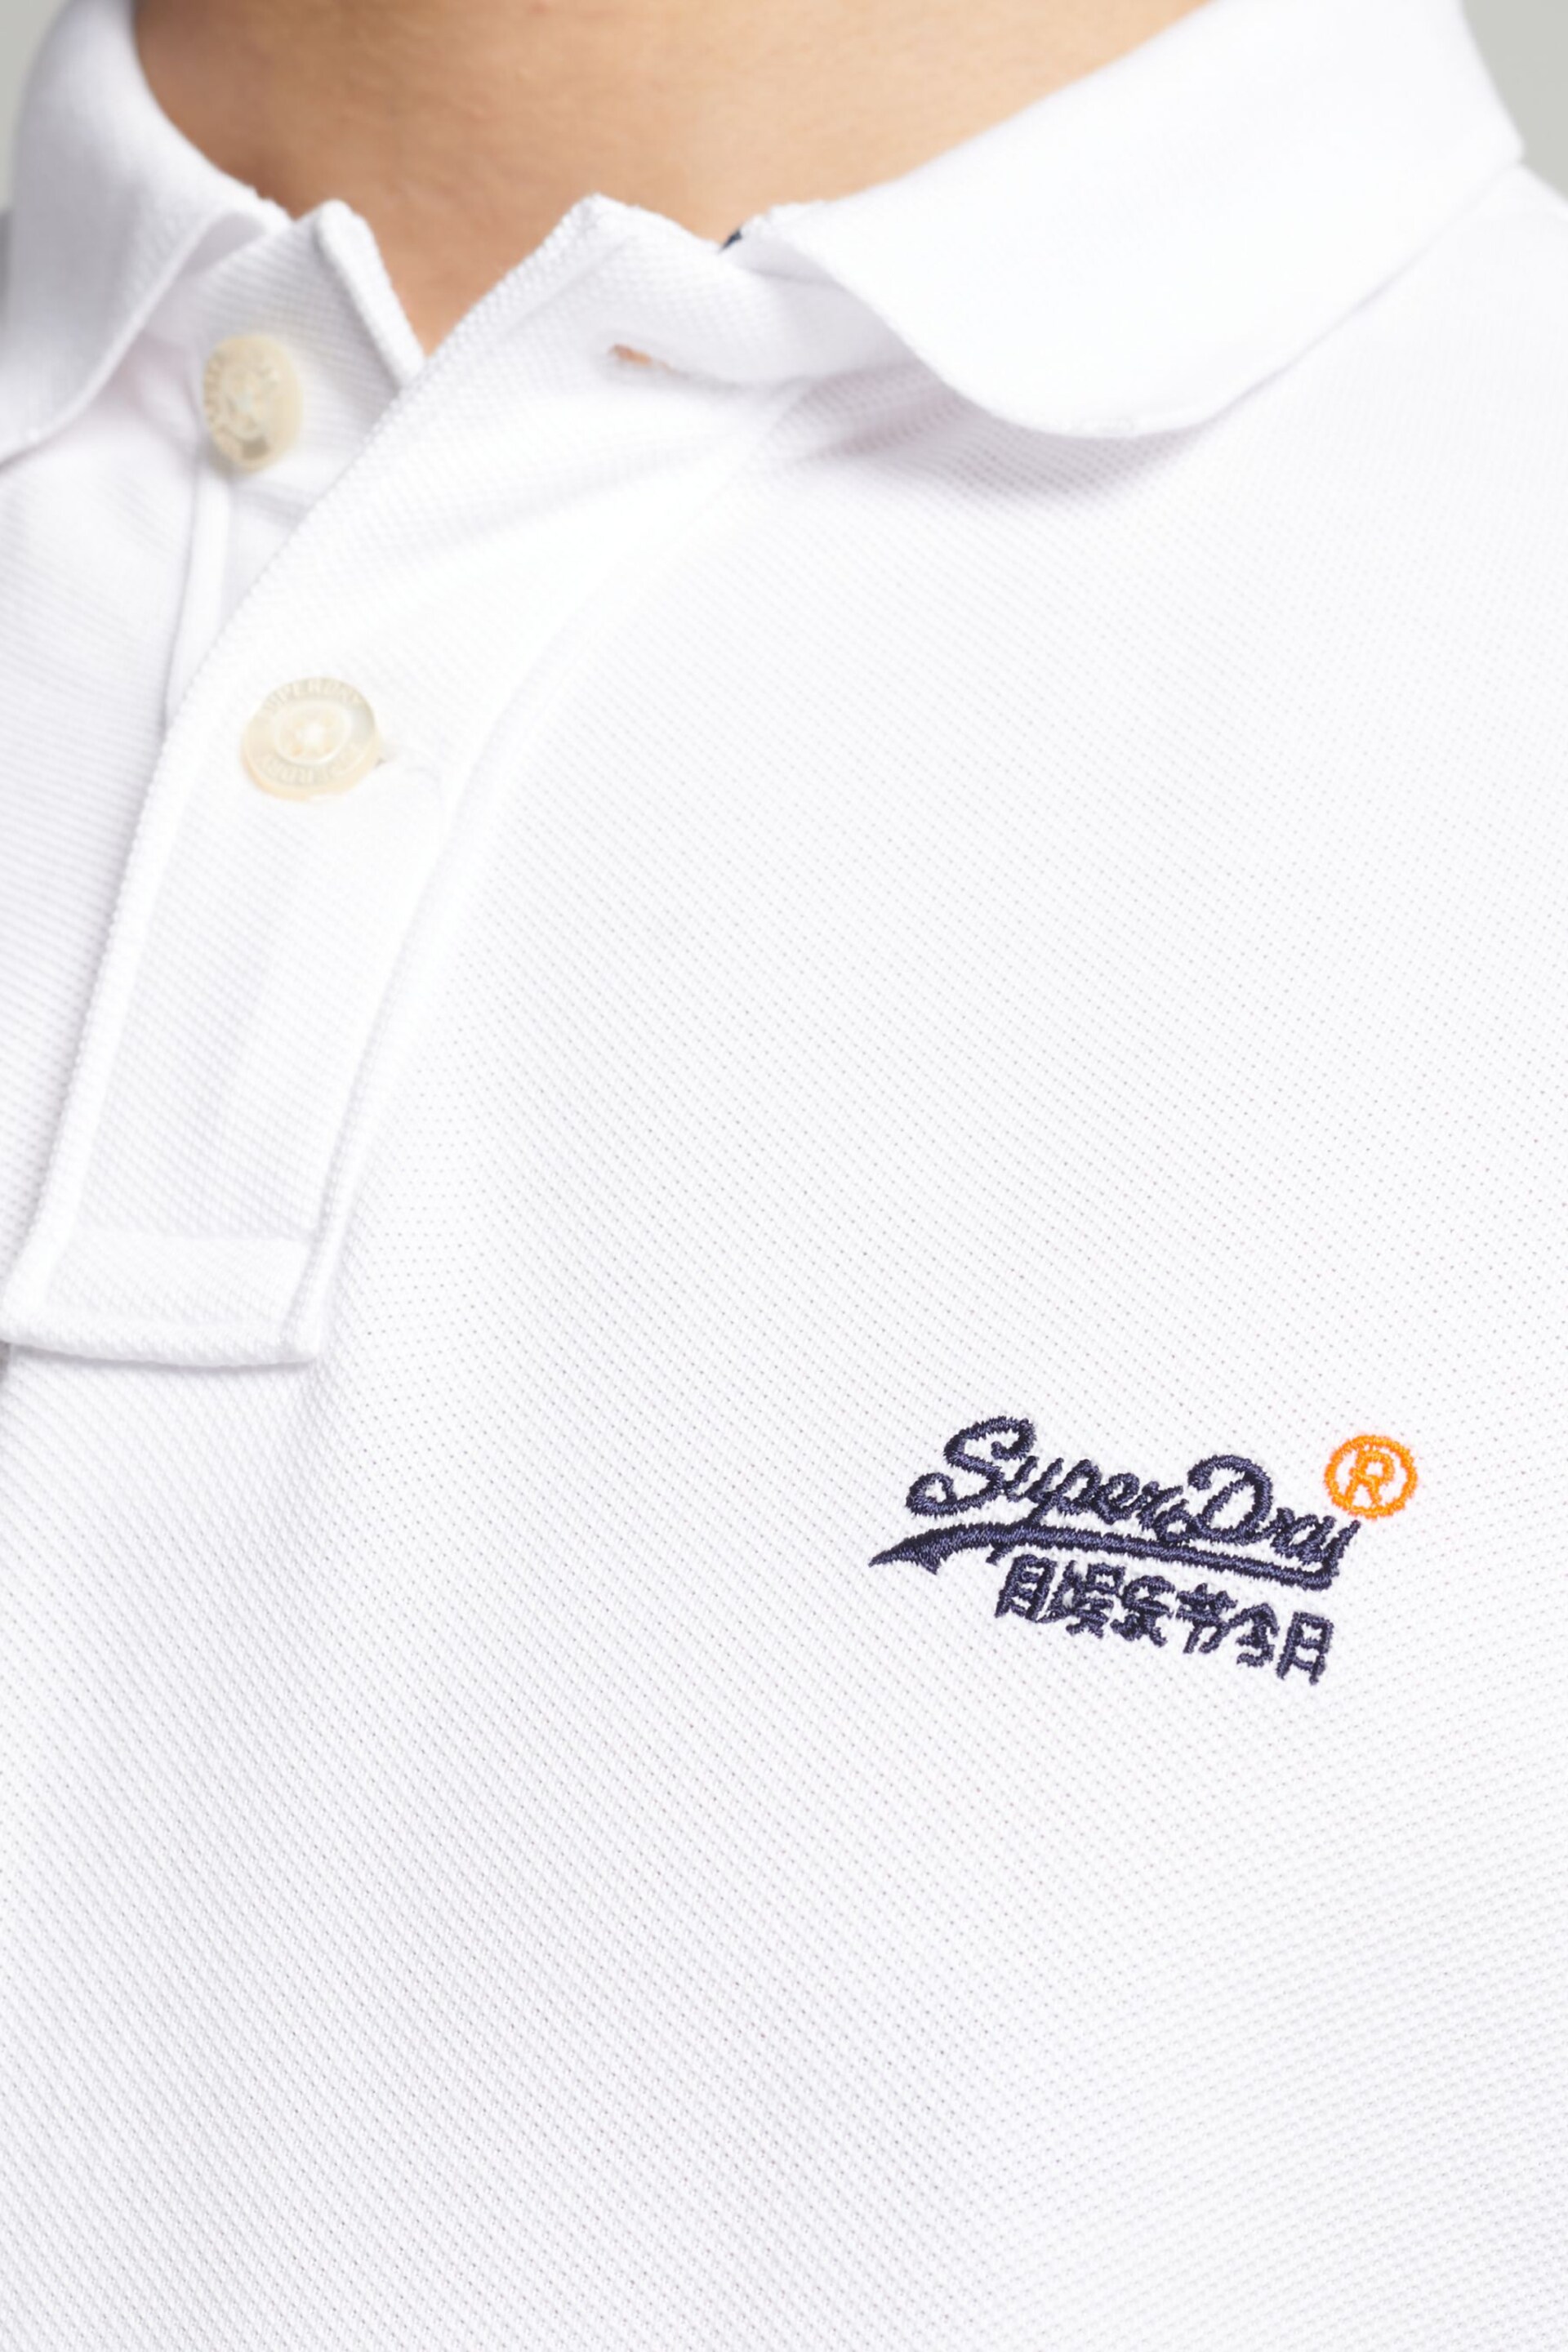 Superdry White Organic Cotton Classic Pique Polo Shirt - Image 3 of 3